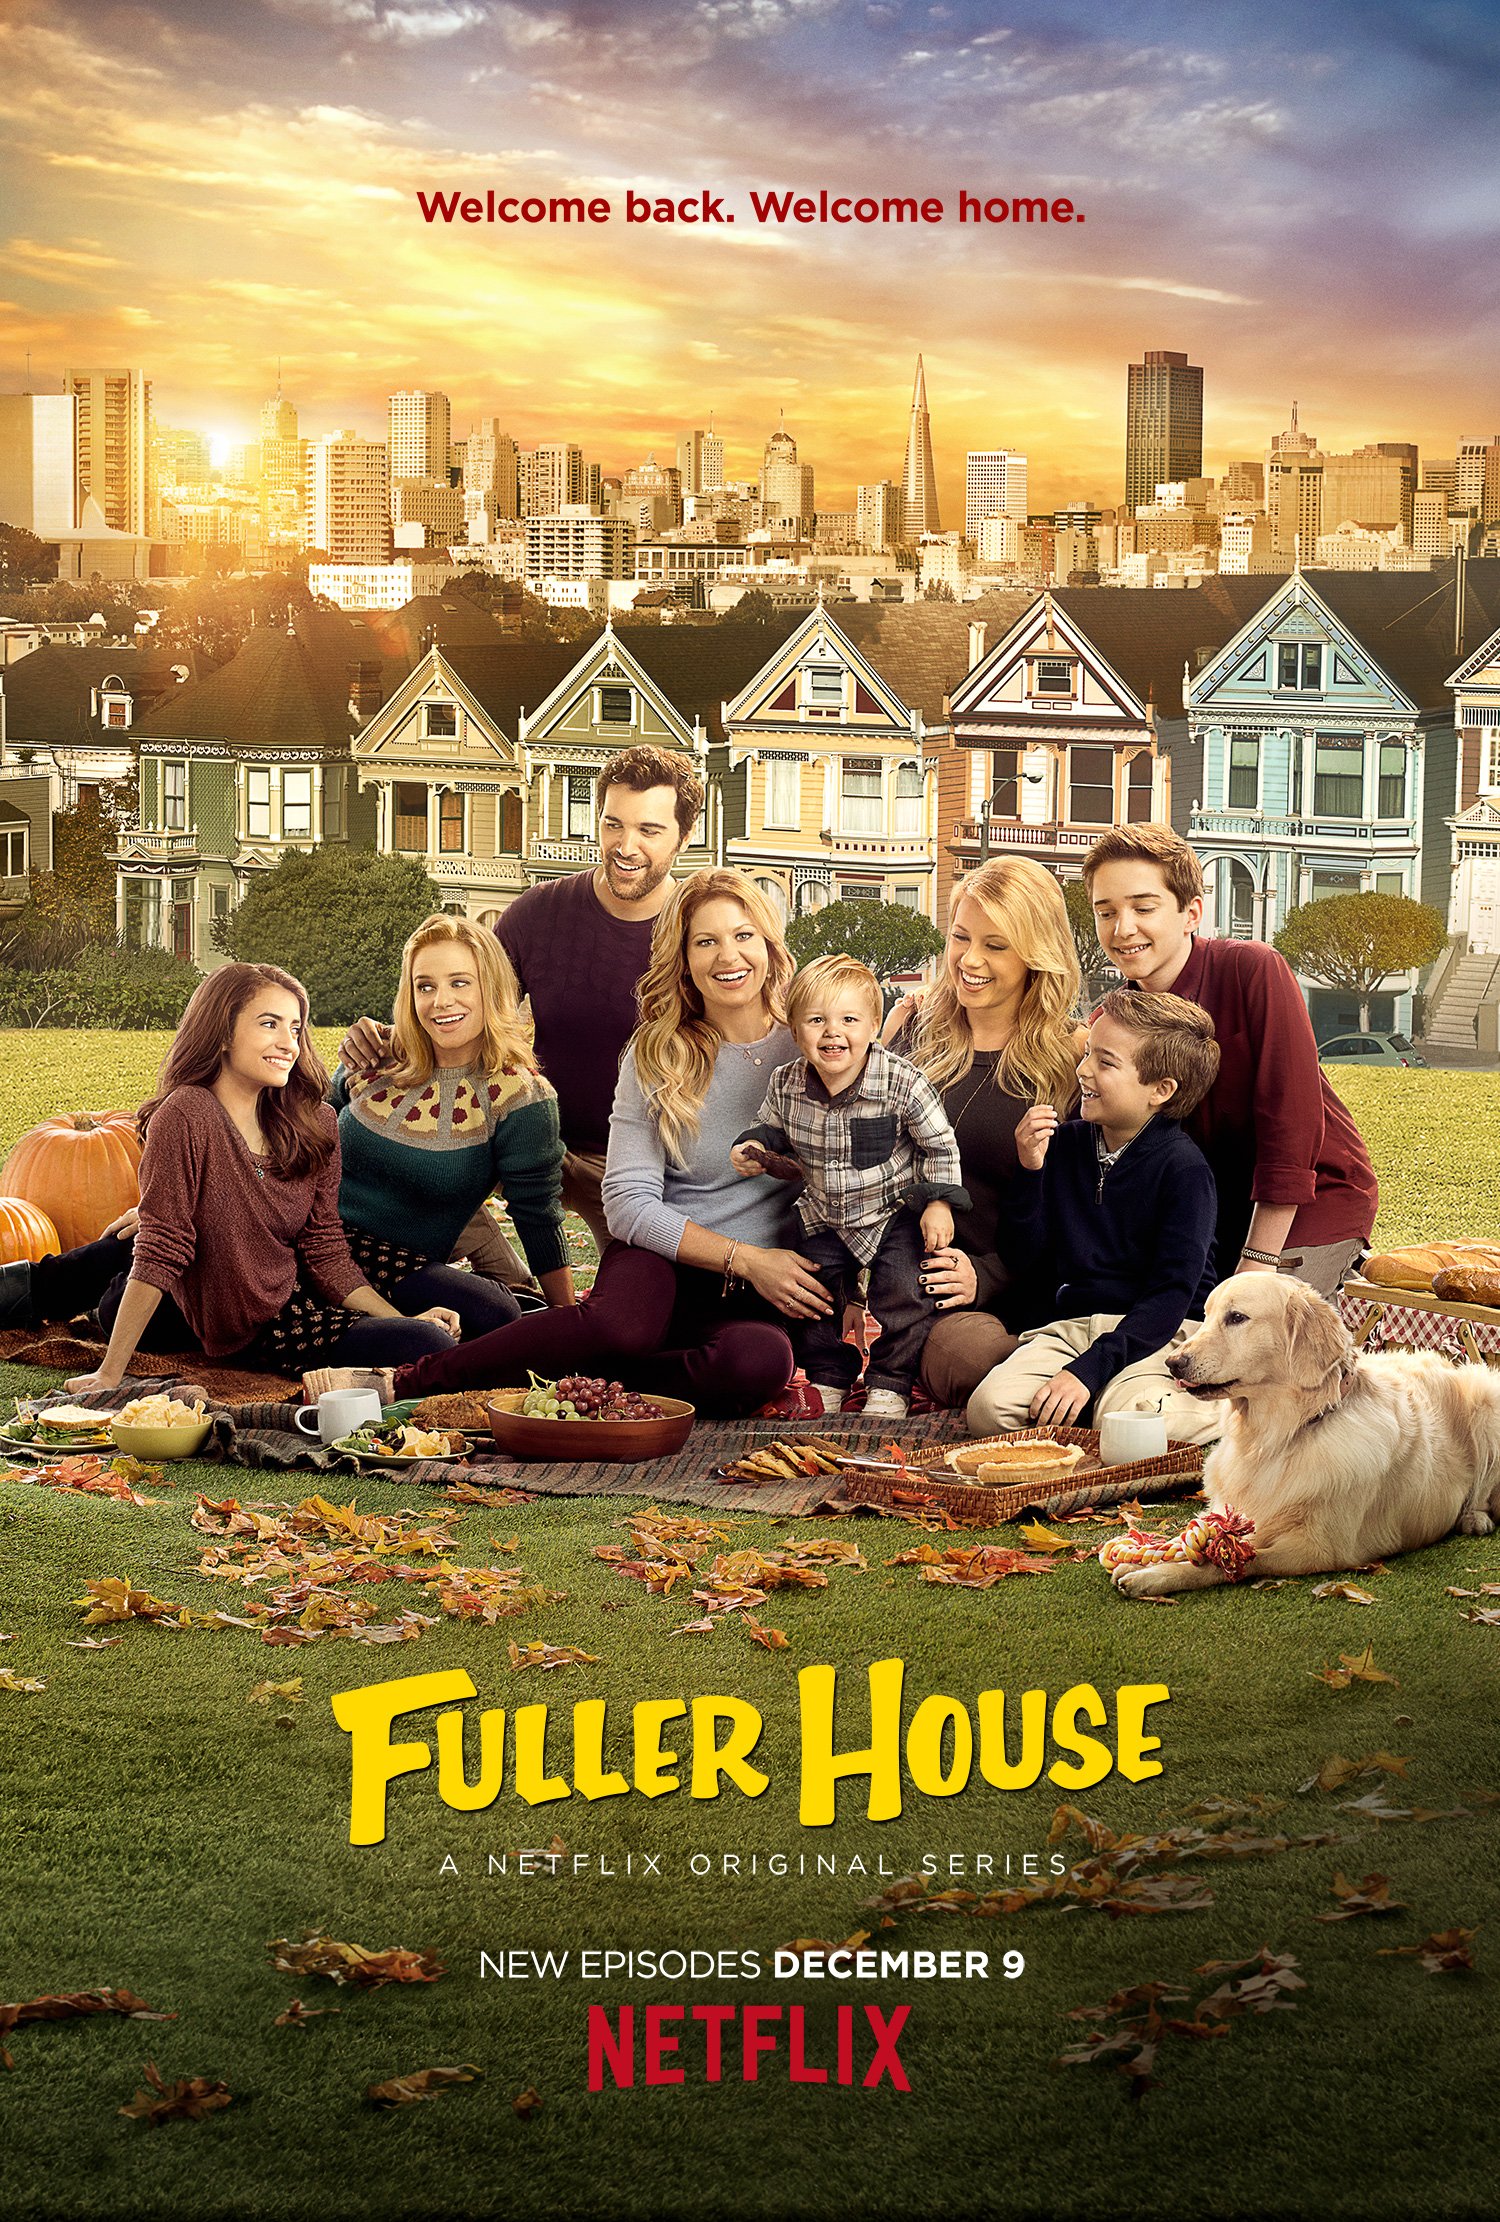 Promotional photos for 'Fuller House'